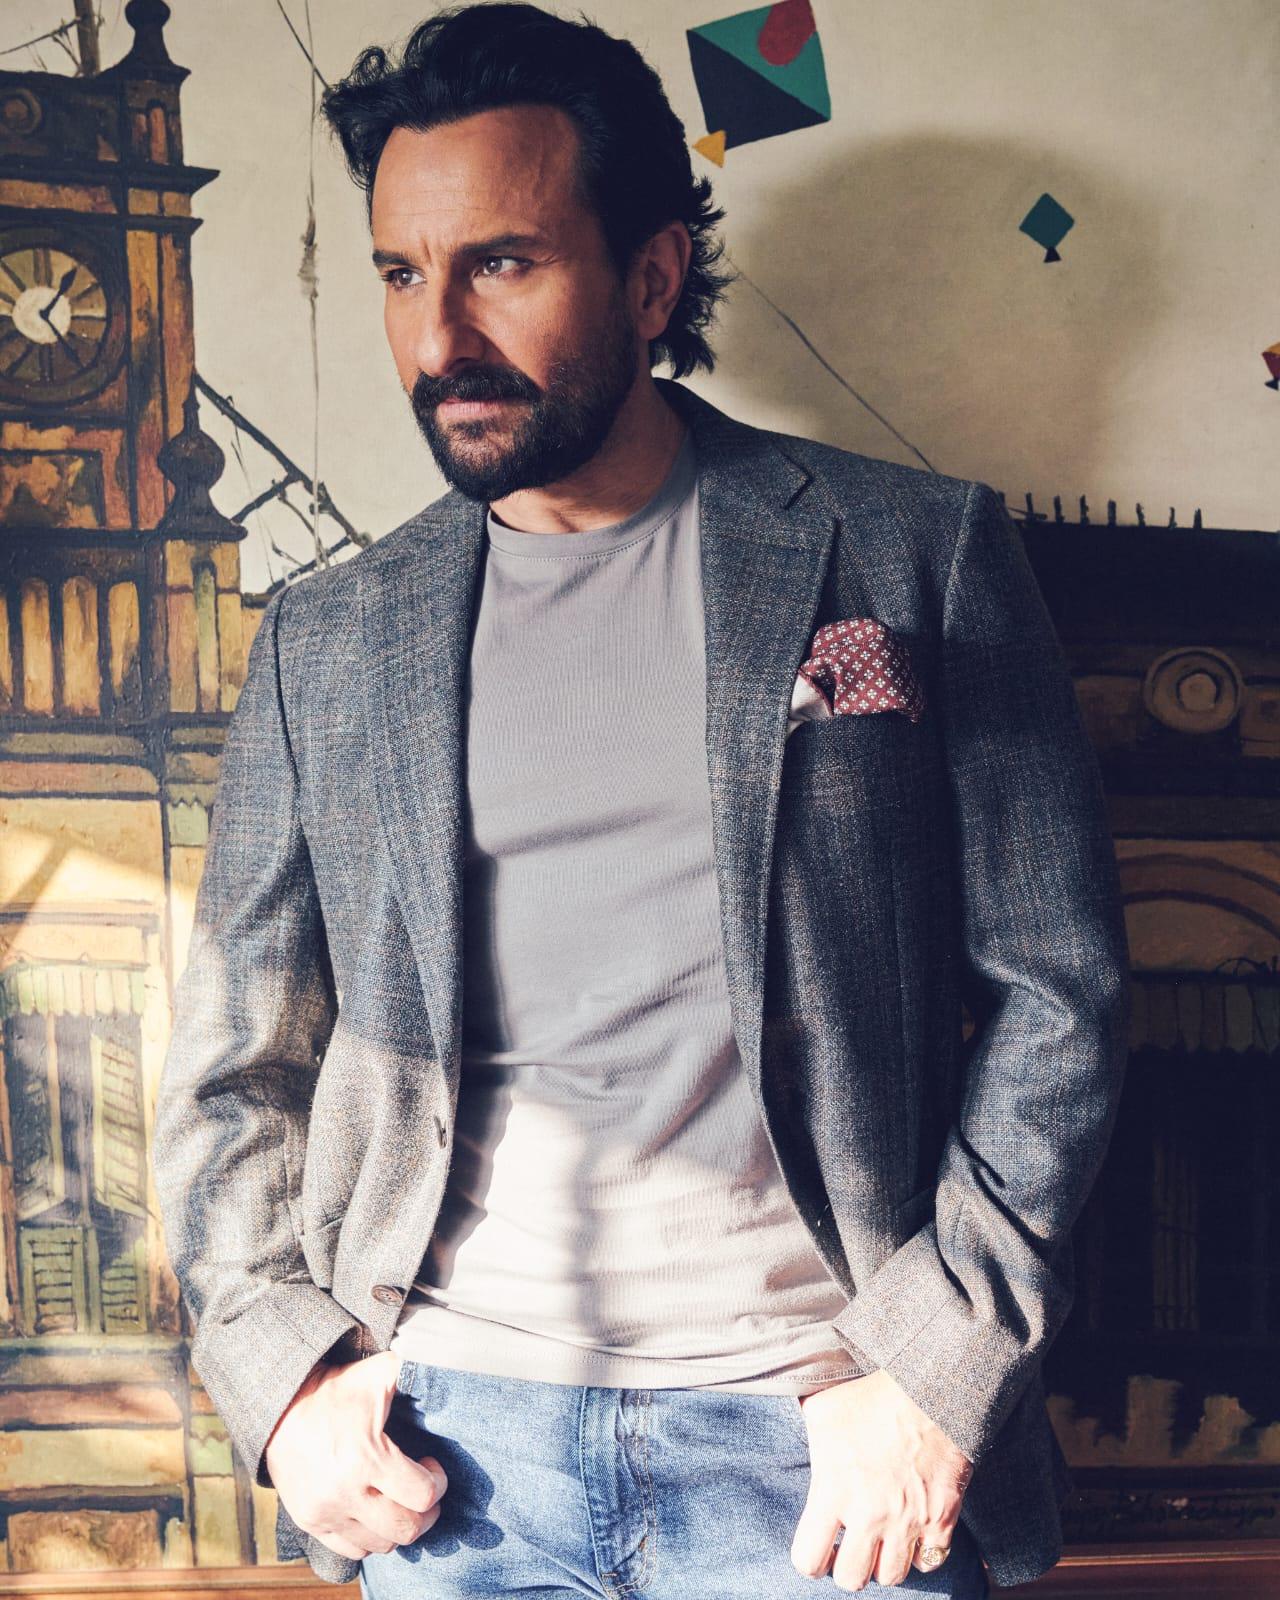 House of Pataudi by Saif Ali KhanIn 2018, House of Pataudi, a clothing line, was introduced. It was the result of a collaboration between renowned Indian actor Saif Ali Khan and leading fashion e-commerce site Myntra